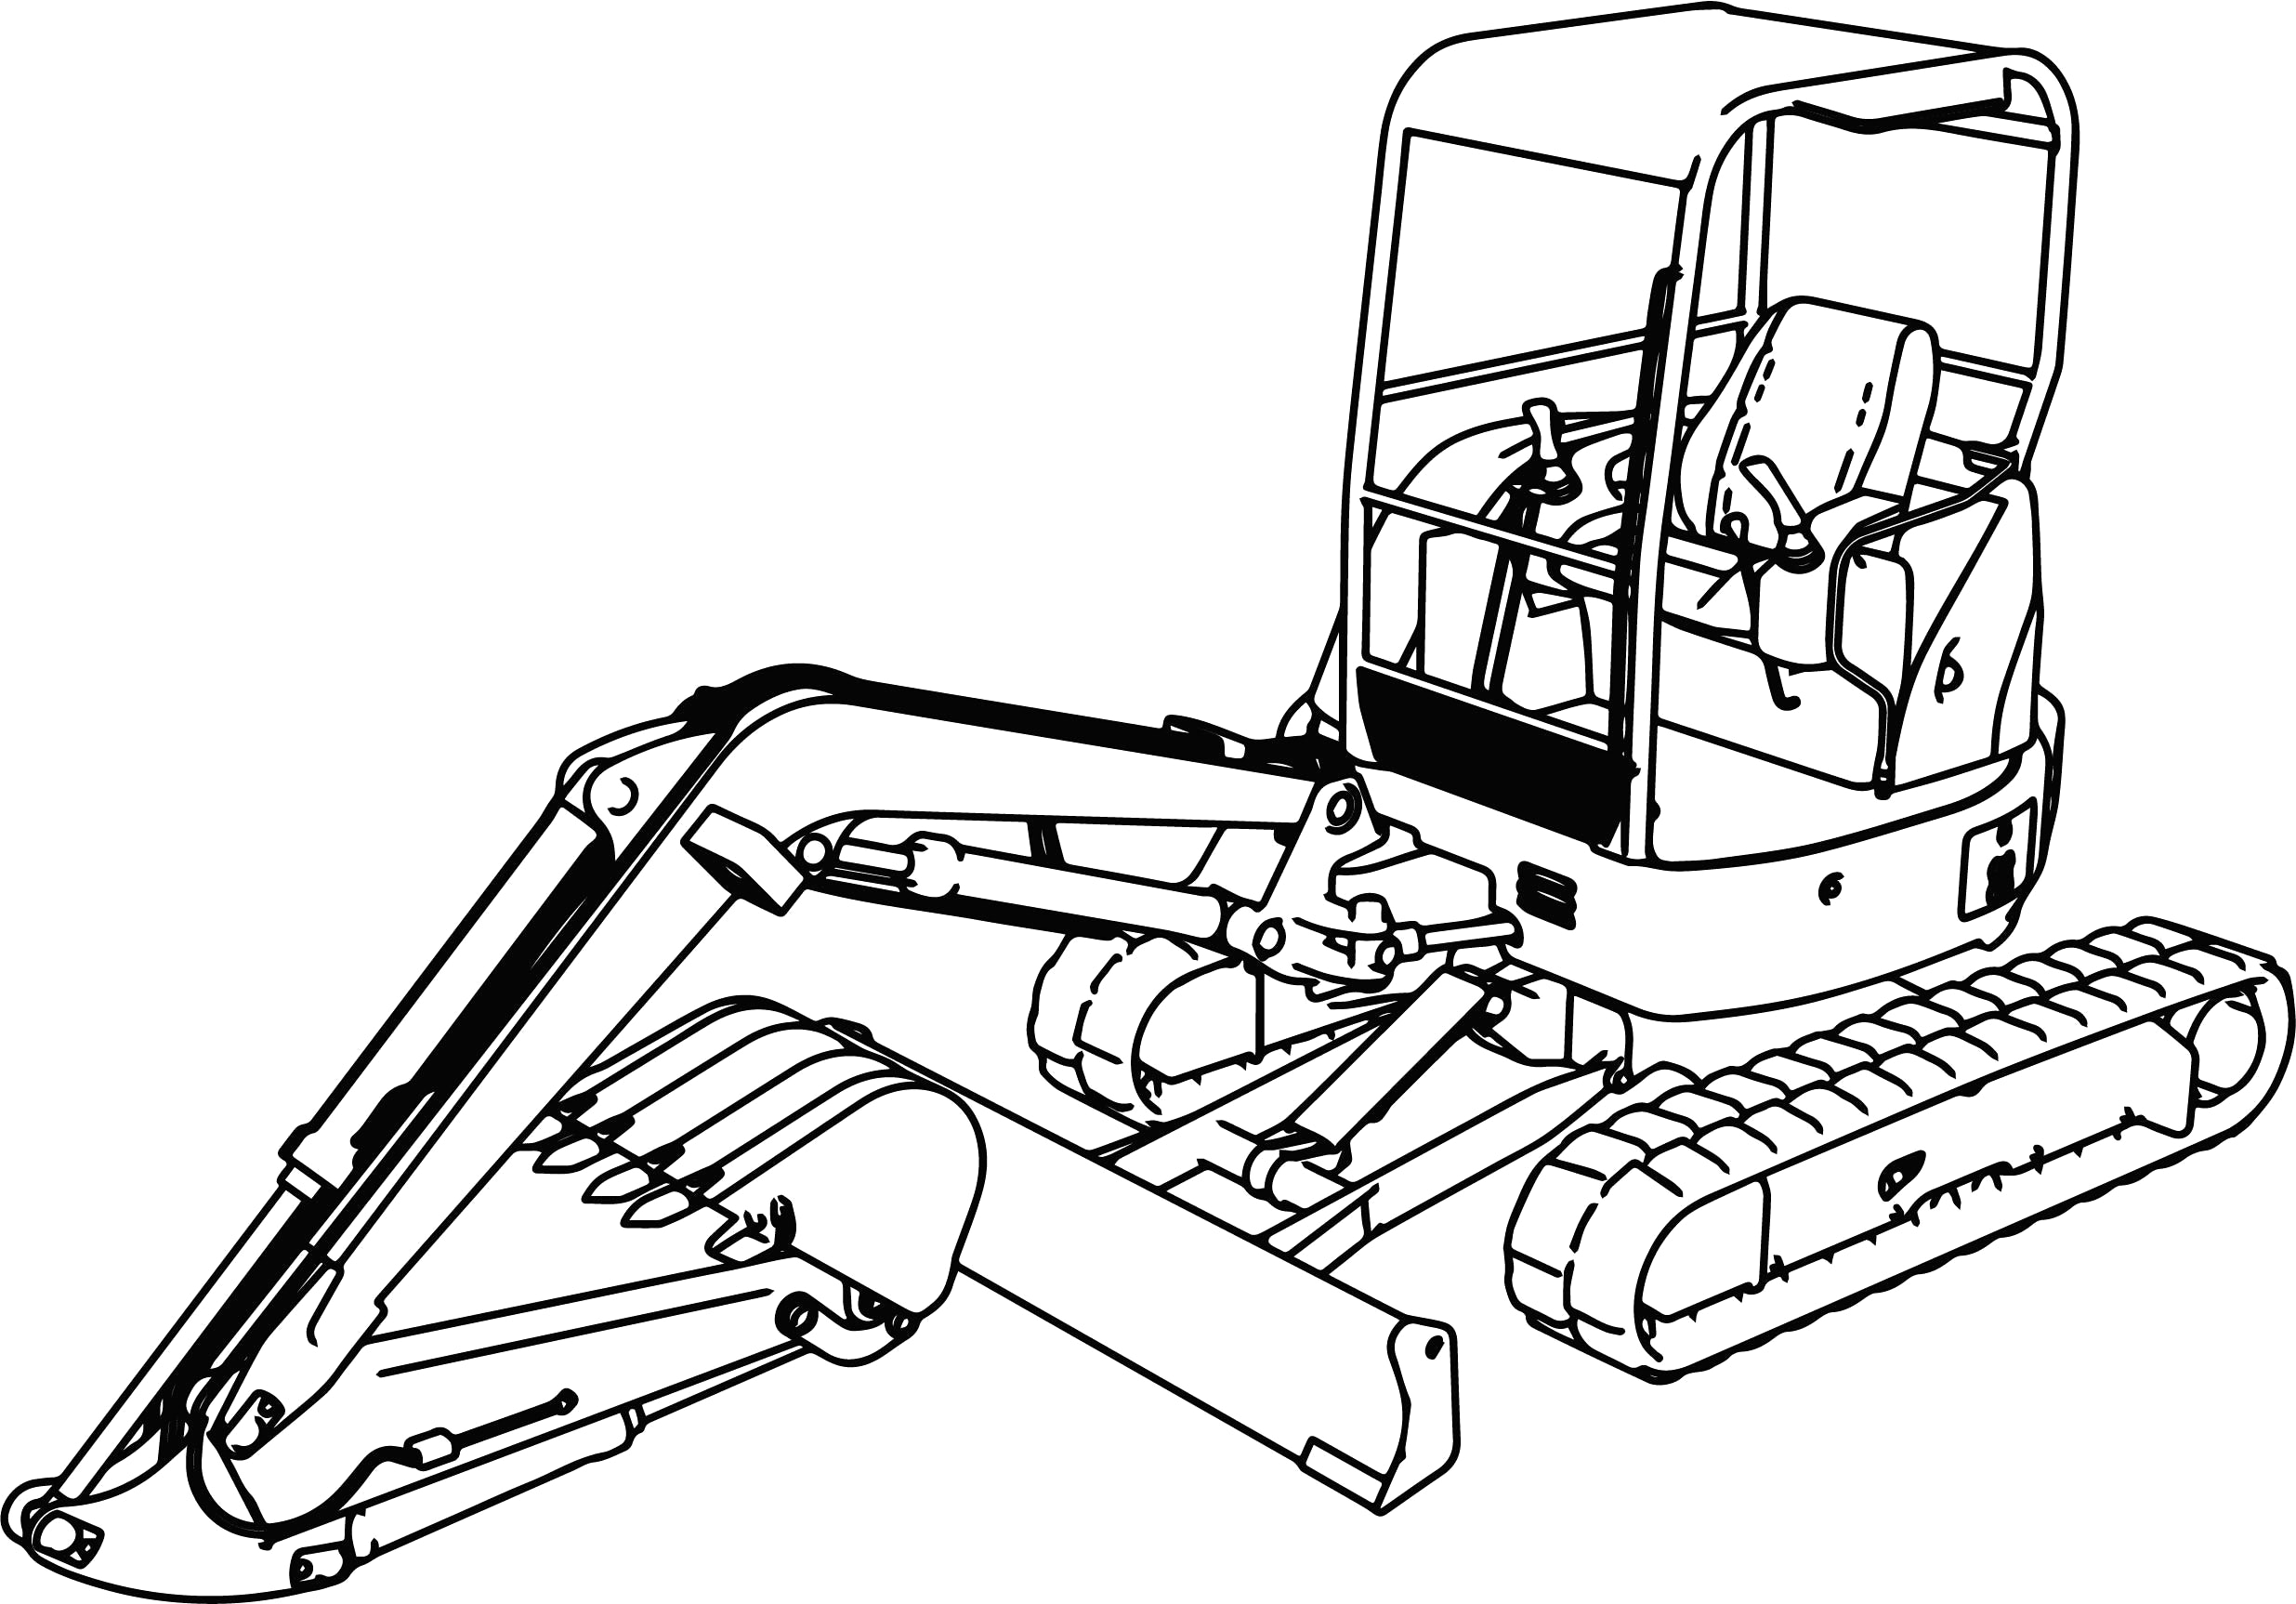 Backhoe Coloring Page At Getcolorings Free Printable Colorings Pages To Print And Color